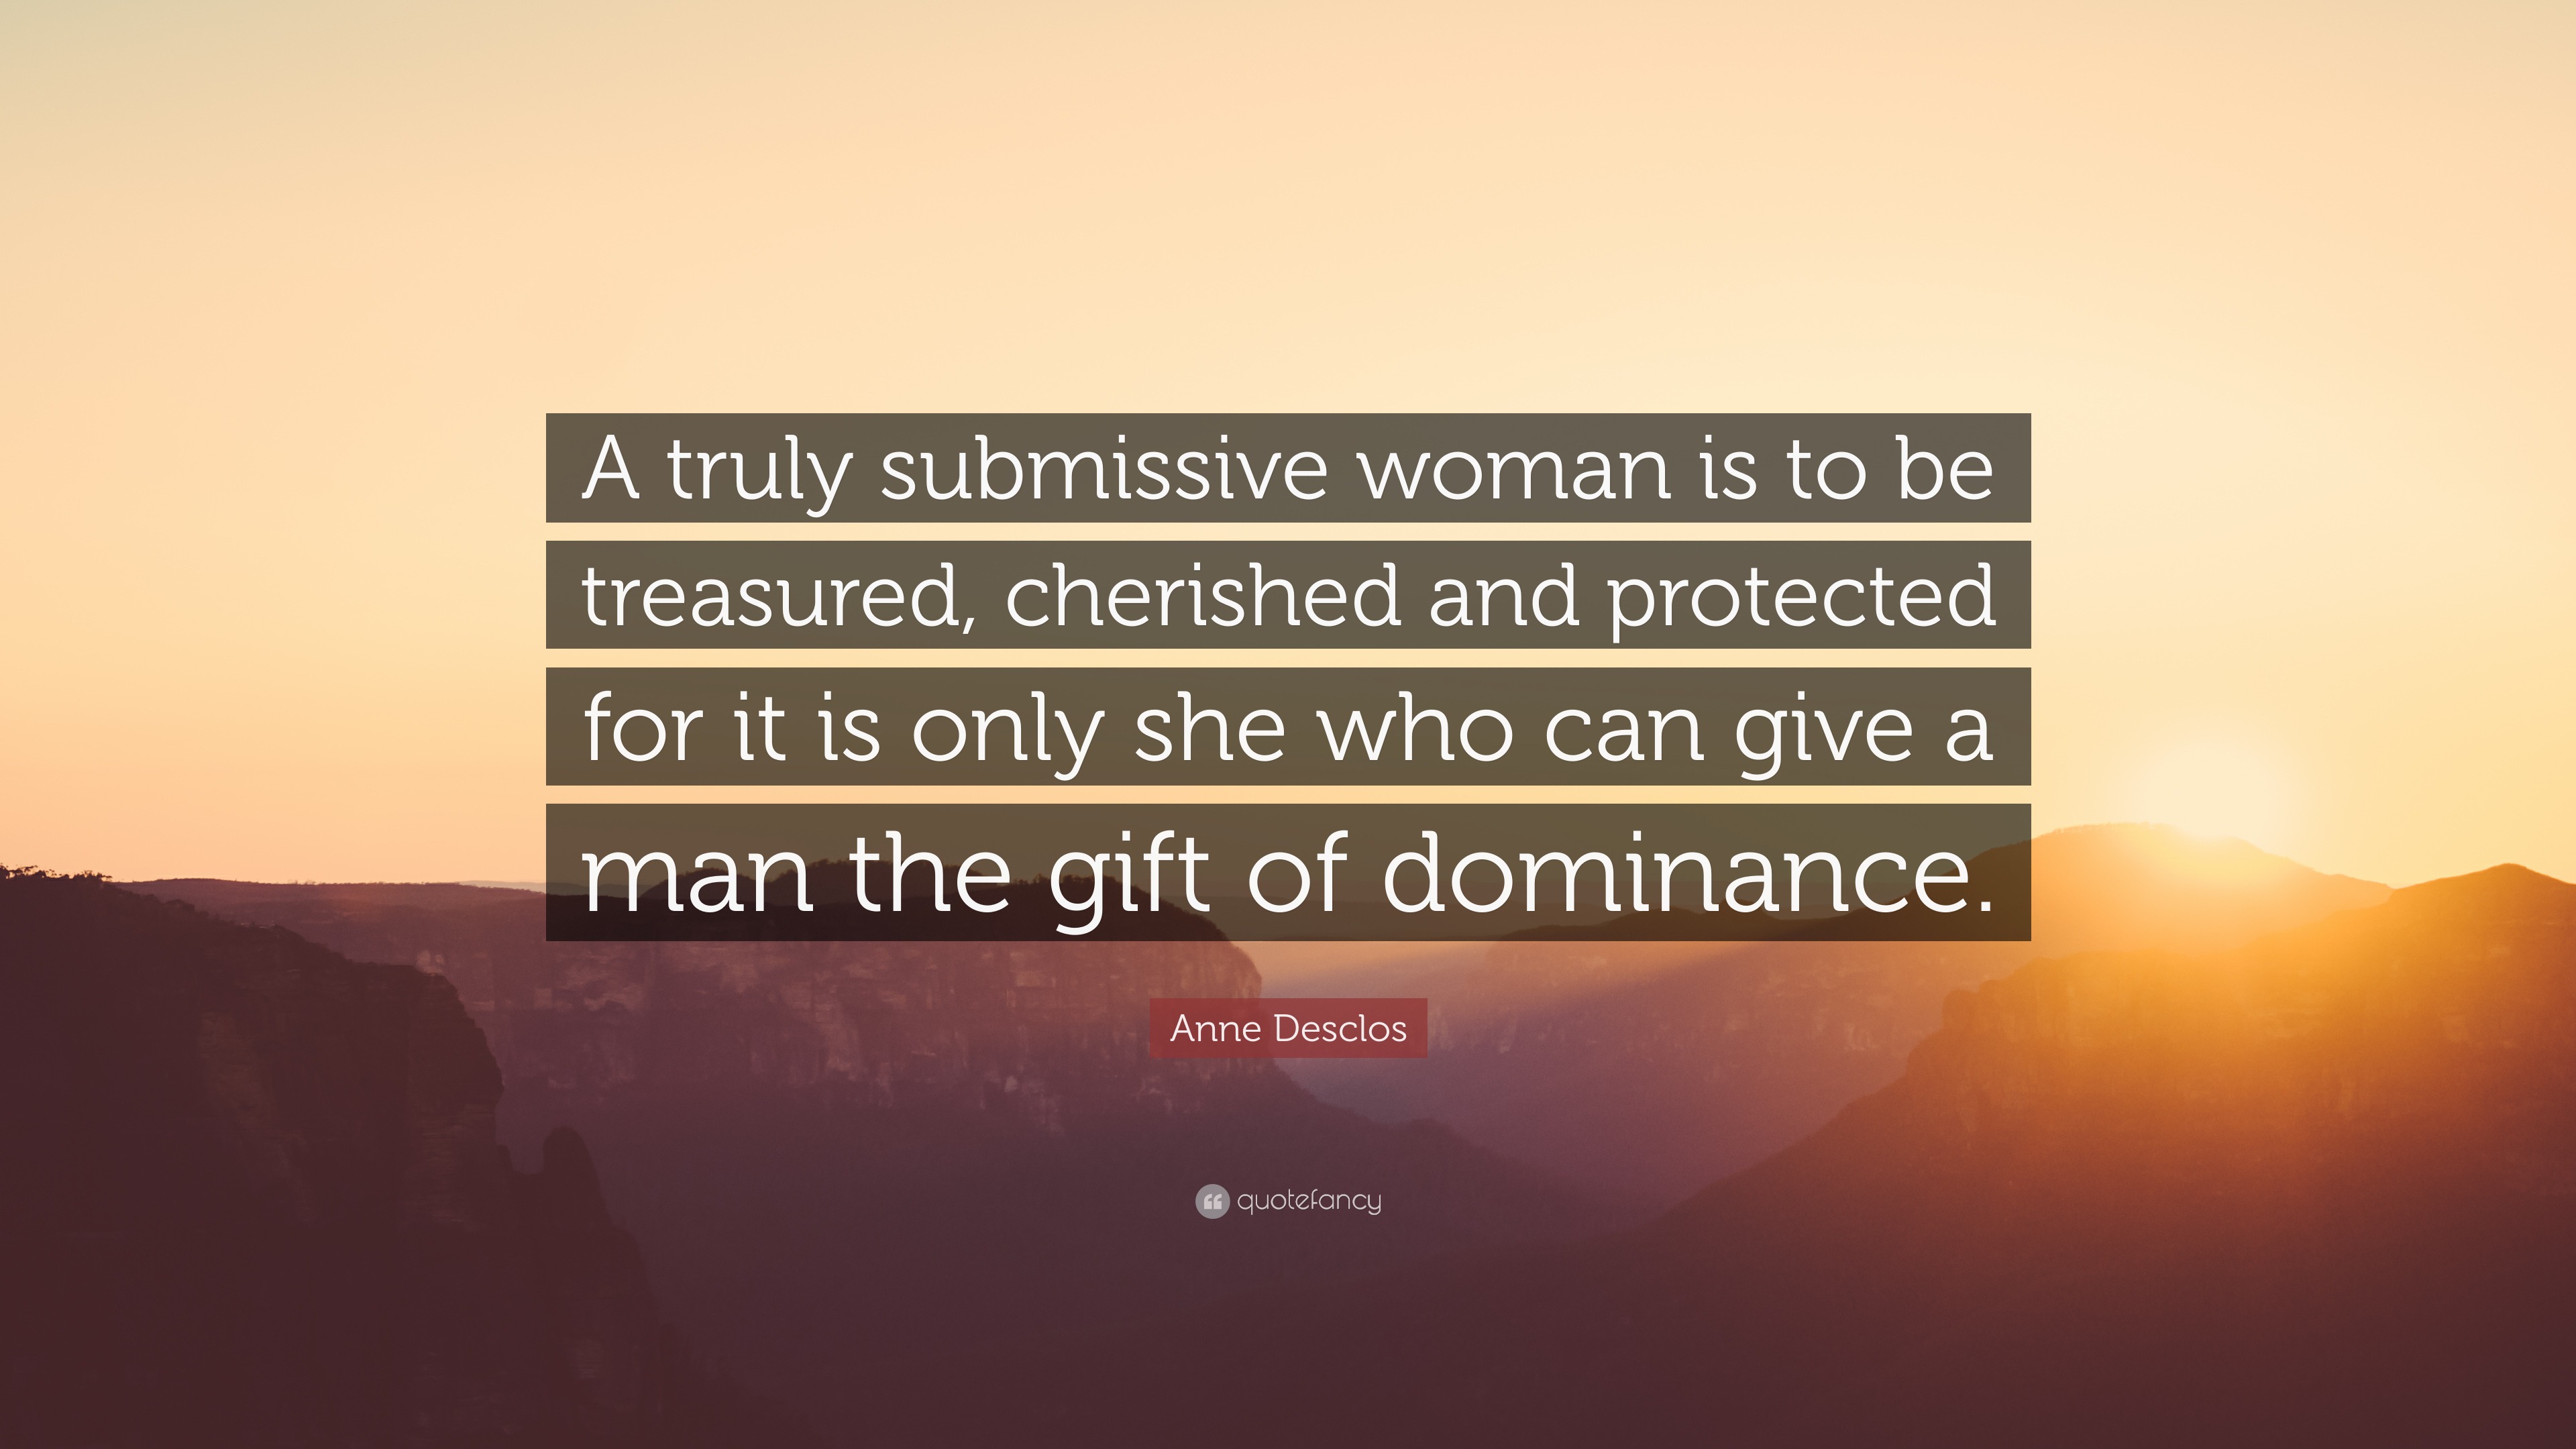 daxita dhankhar add dominance and submission quotes photo